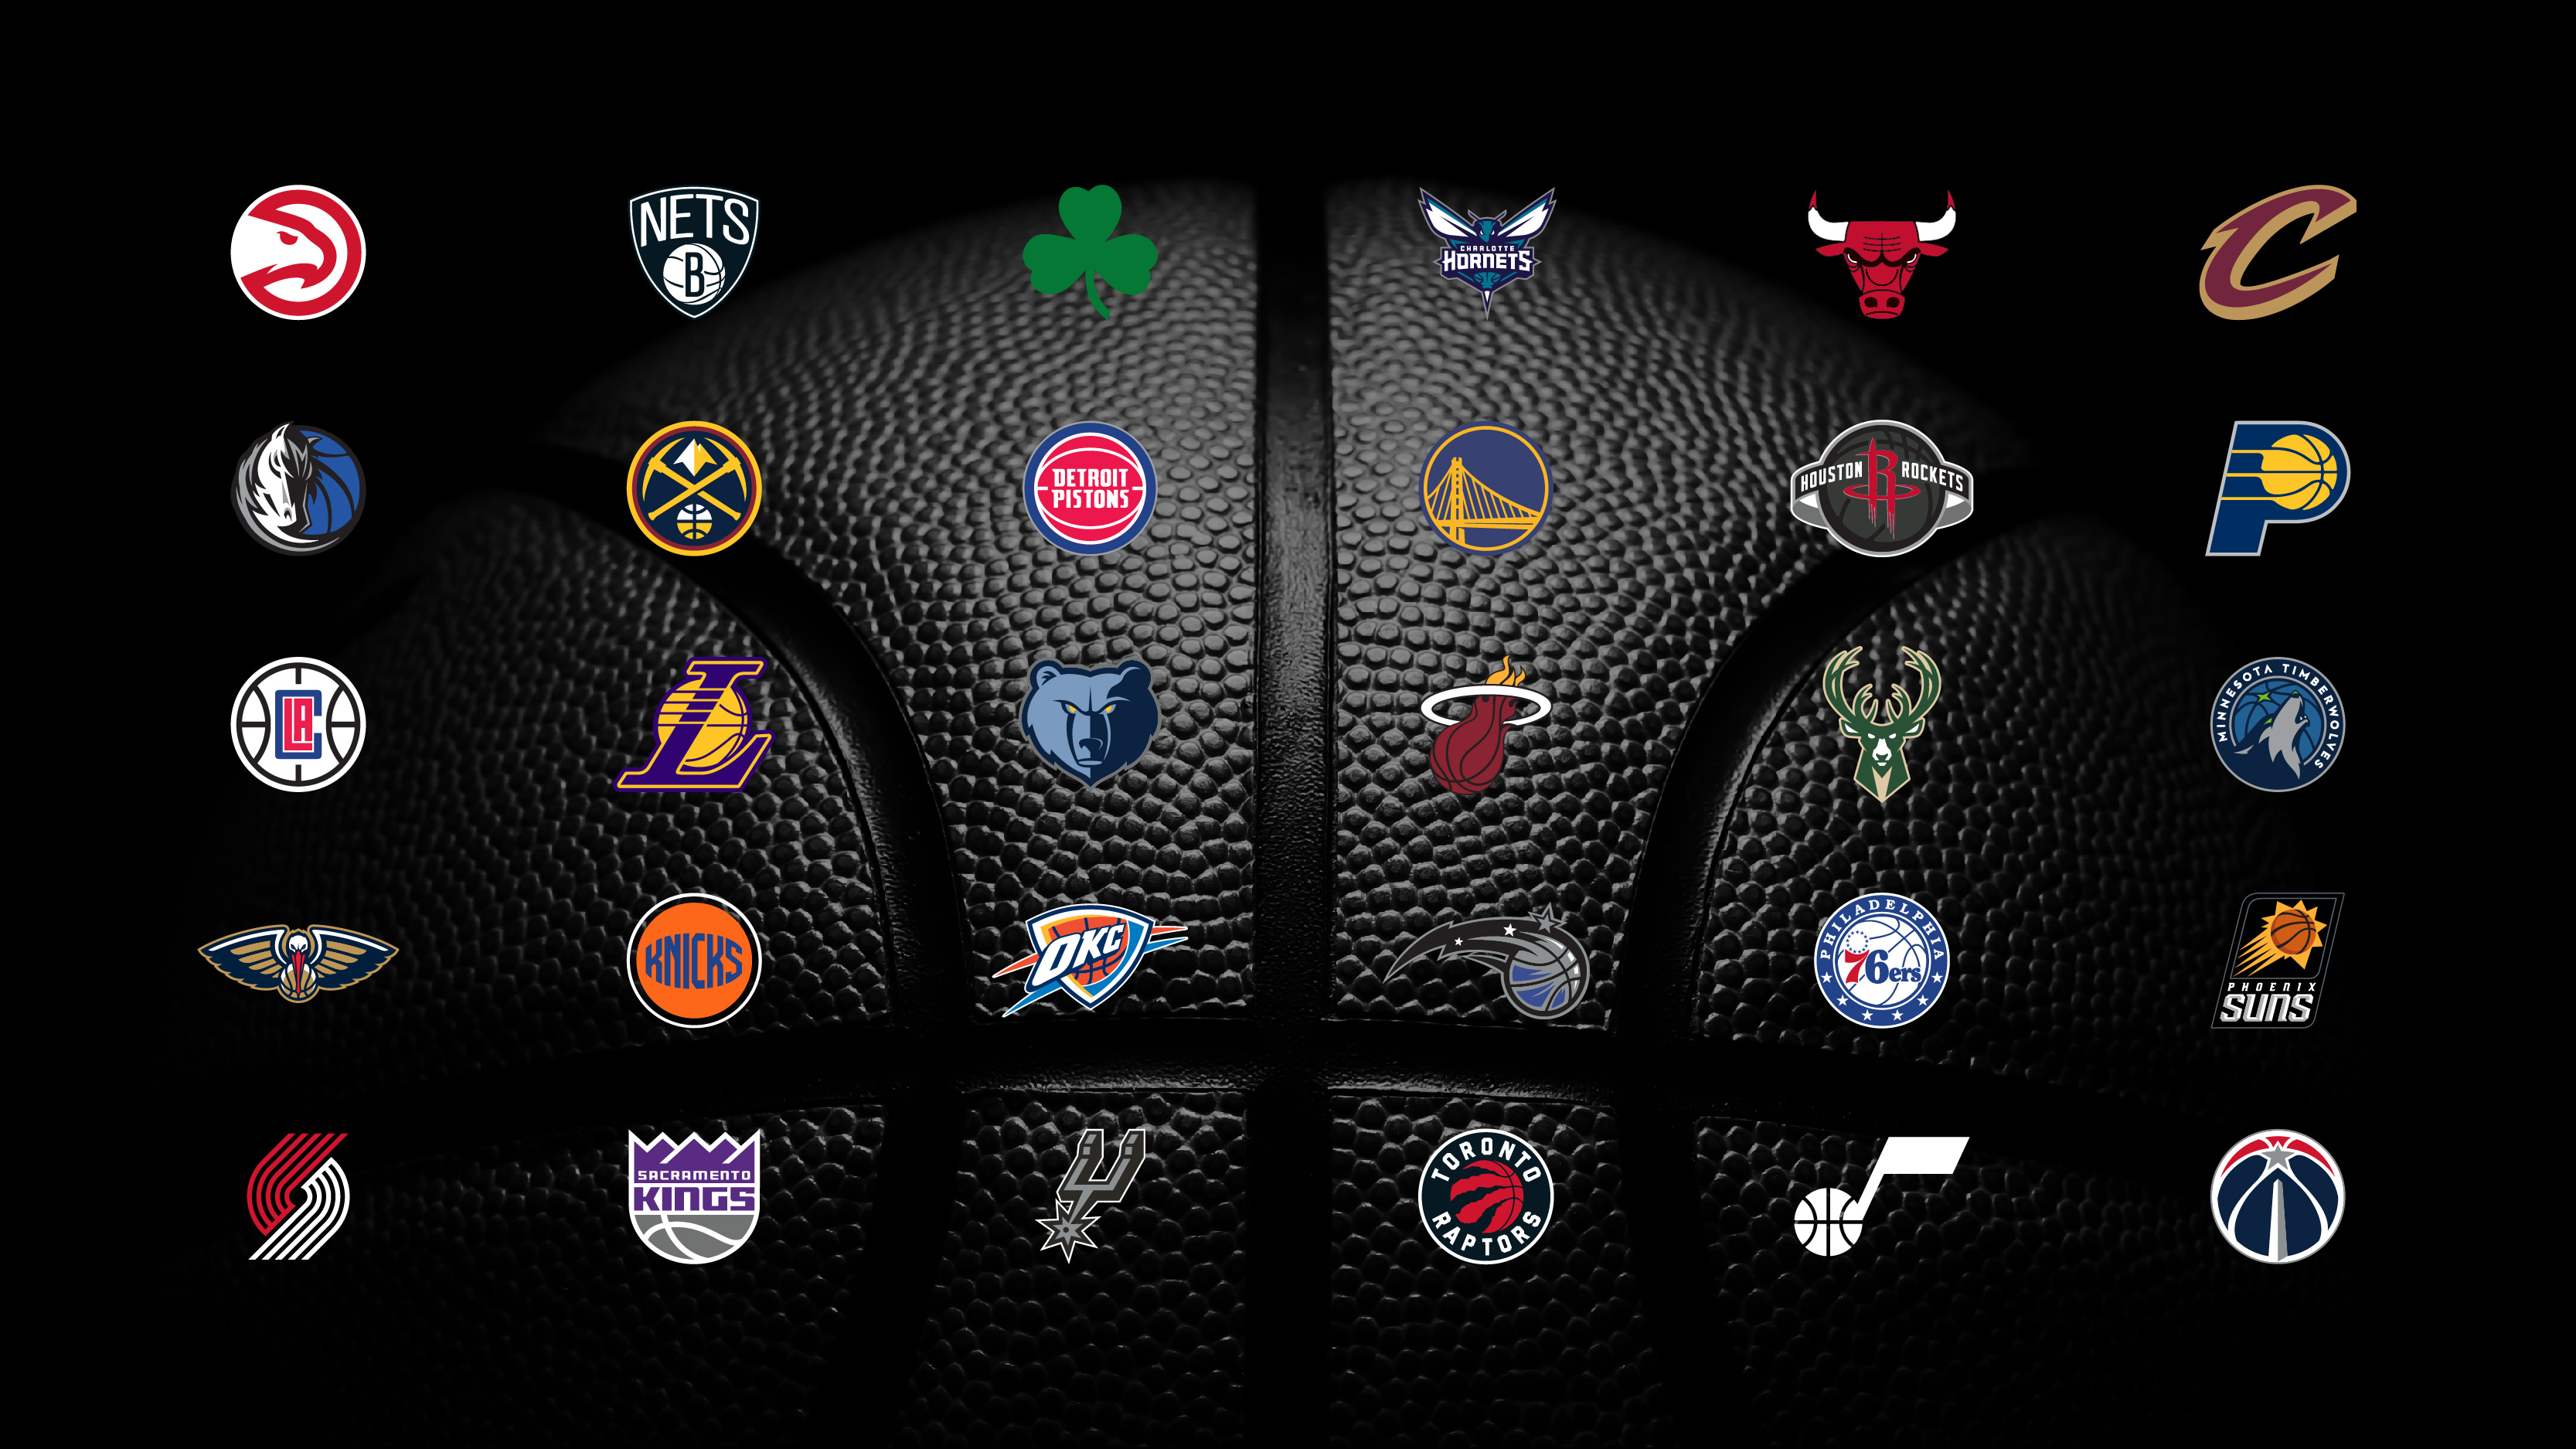 Avery Dennison nets NBA license agreement to produce on-court and retail Embelex items